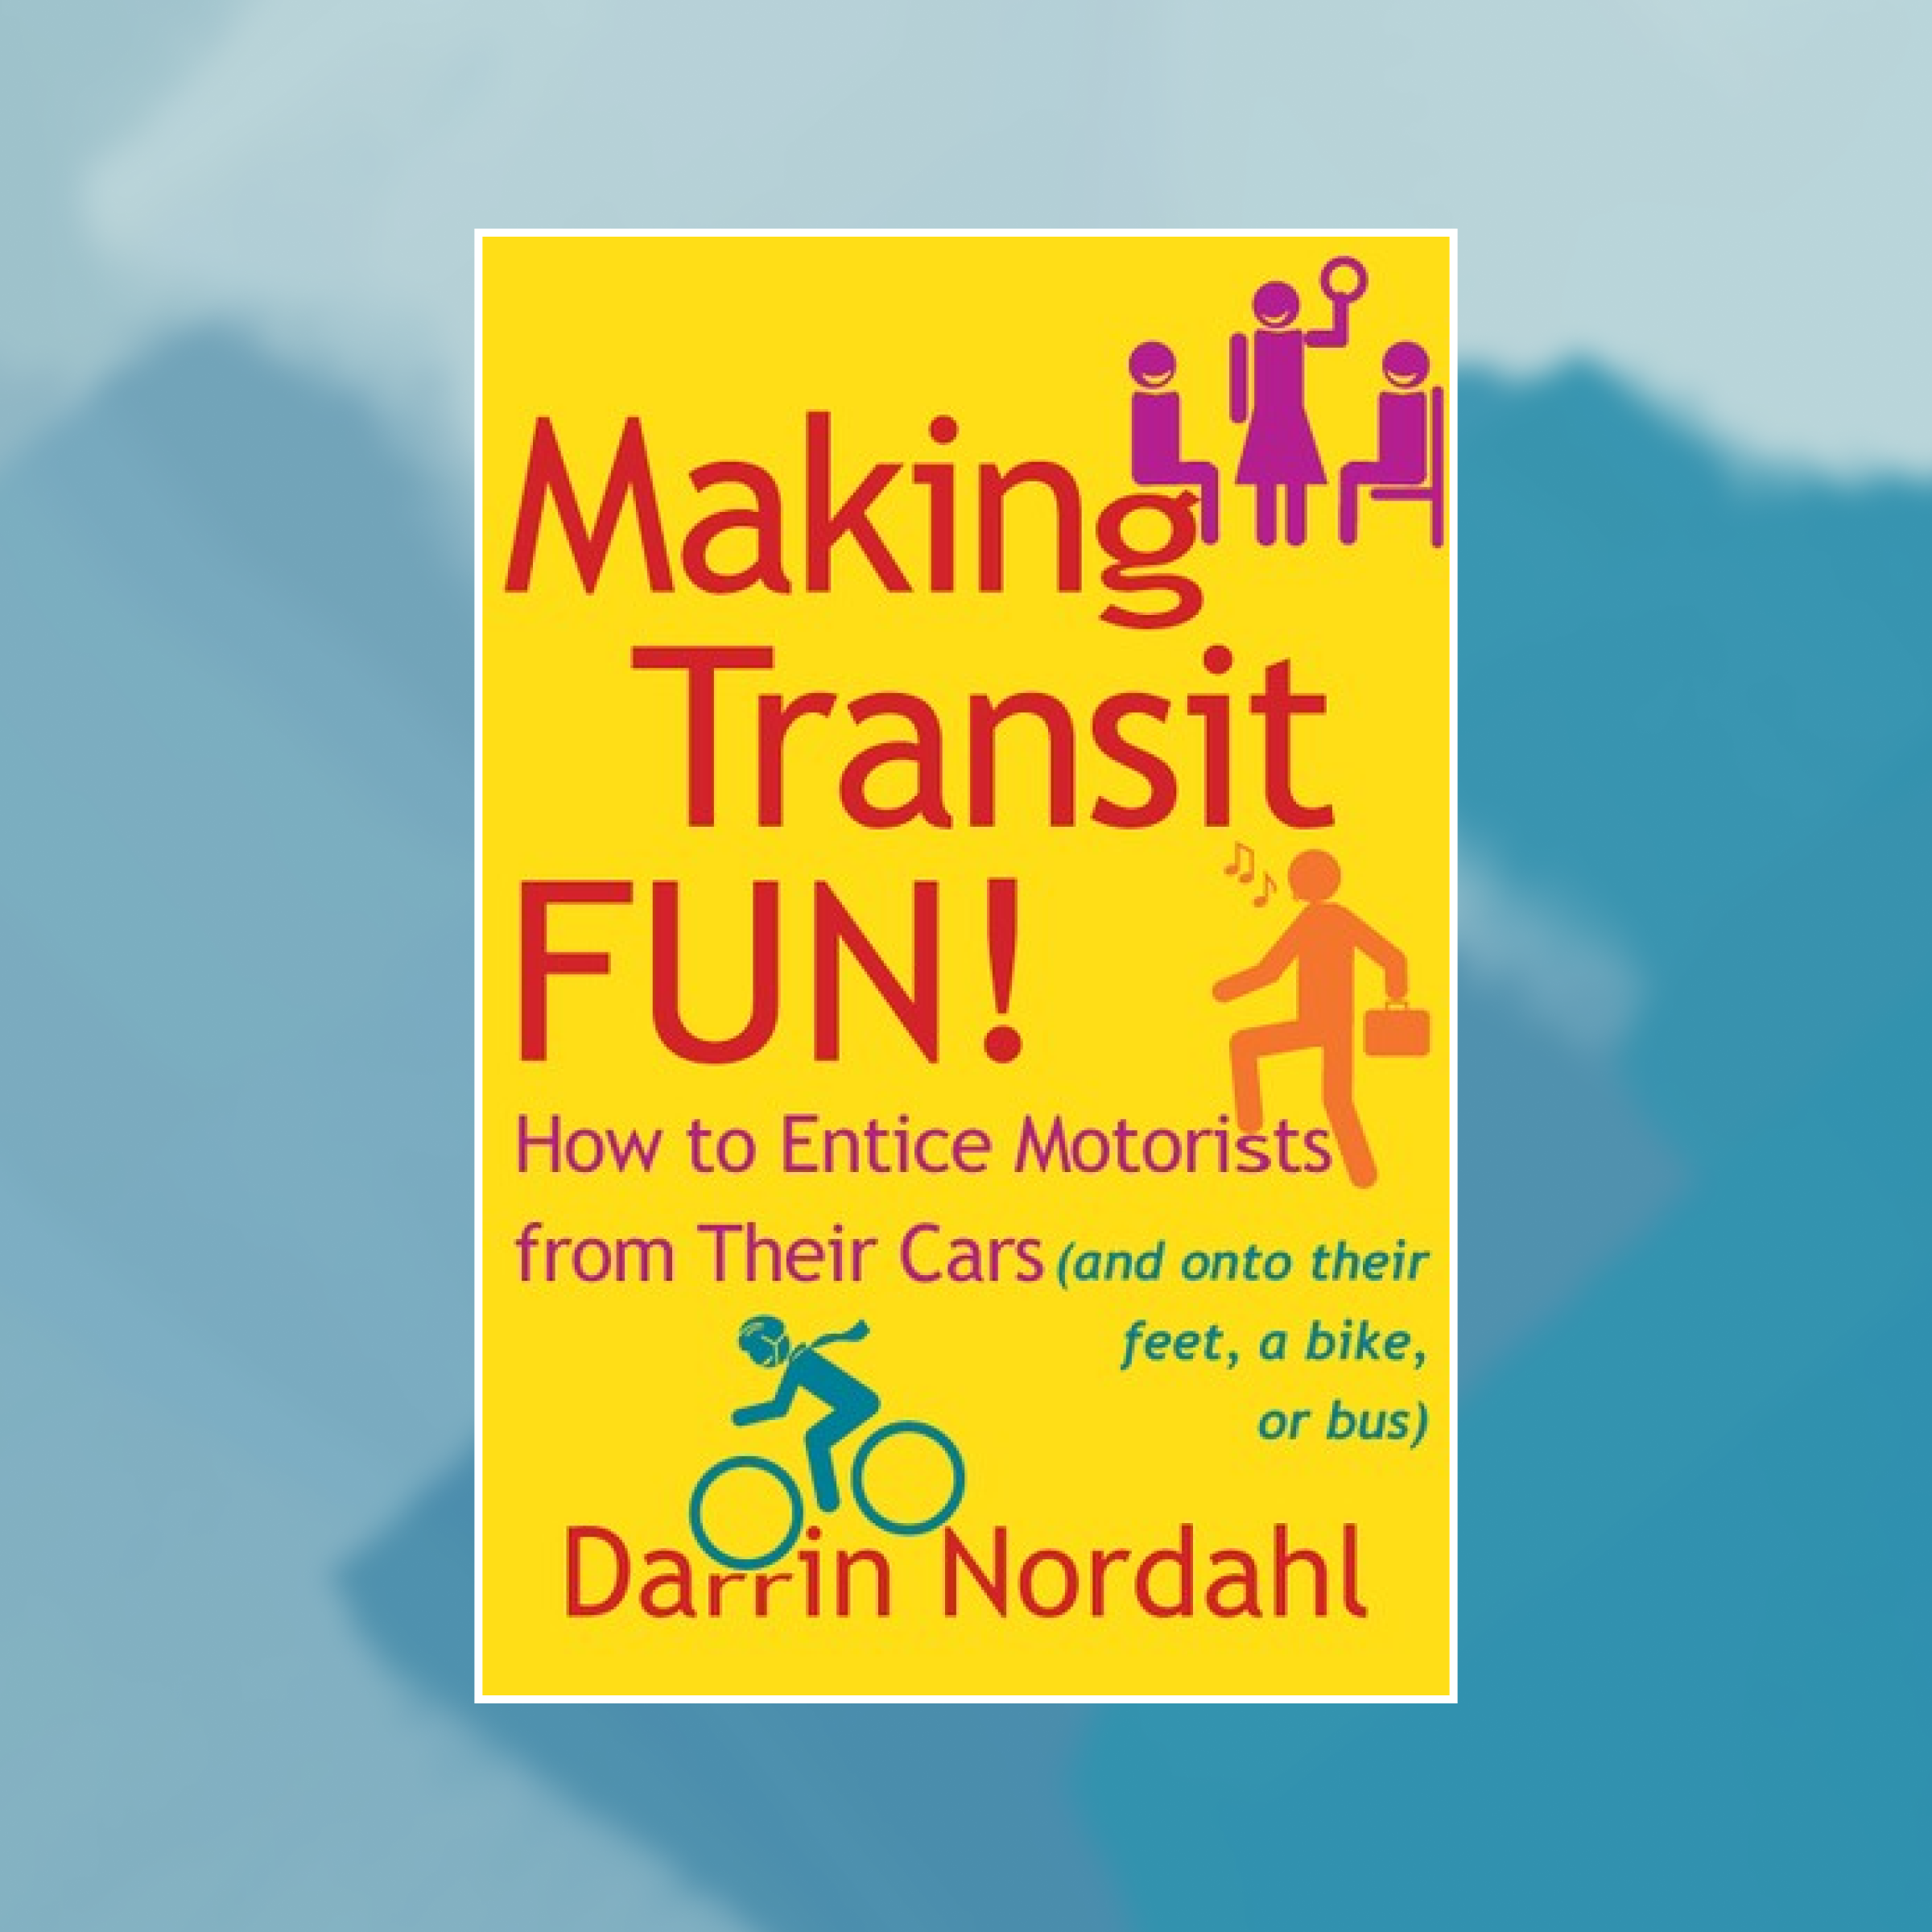 Book cover of Making Transit Fun! against an abstract painted background